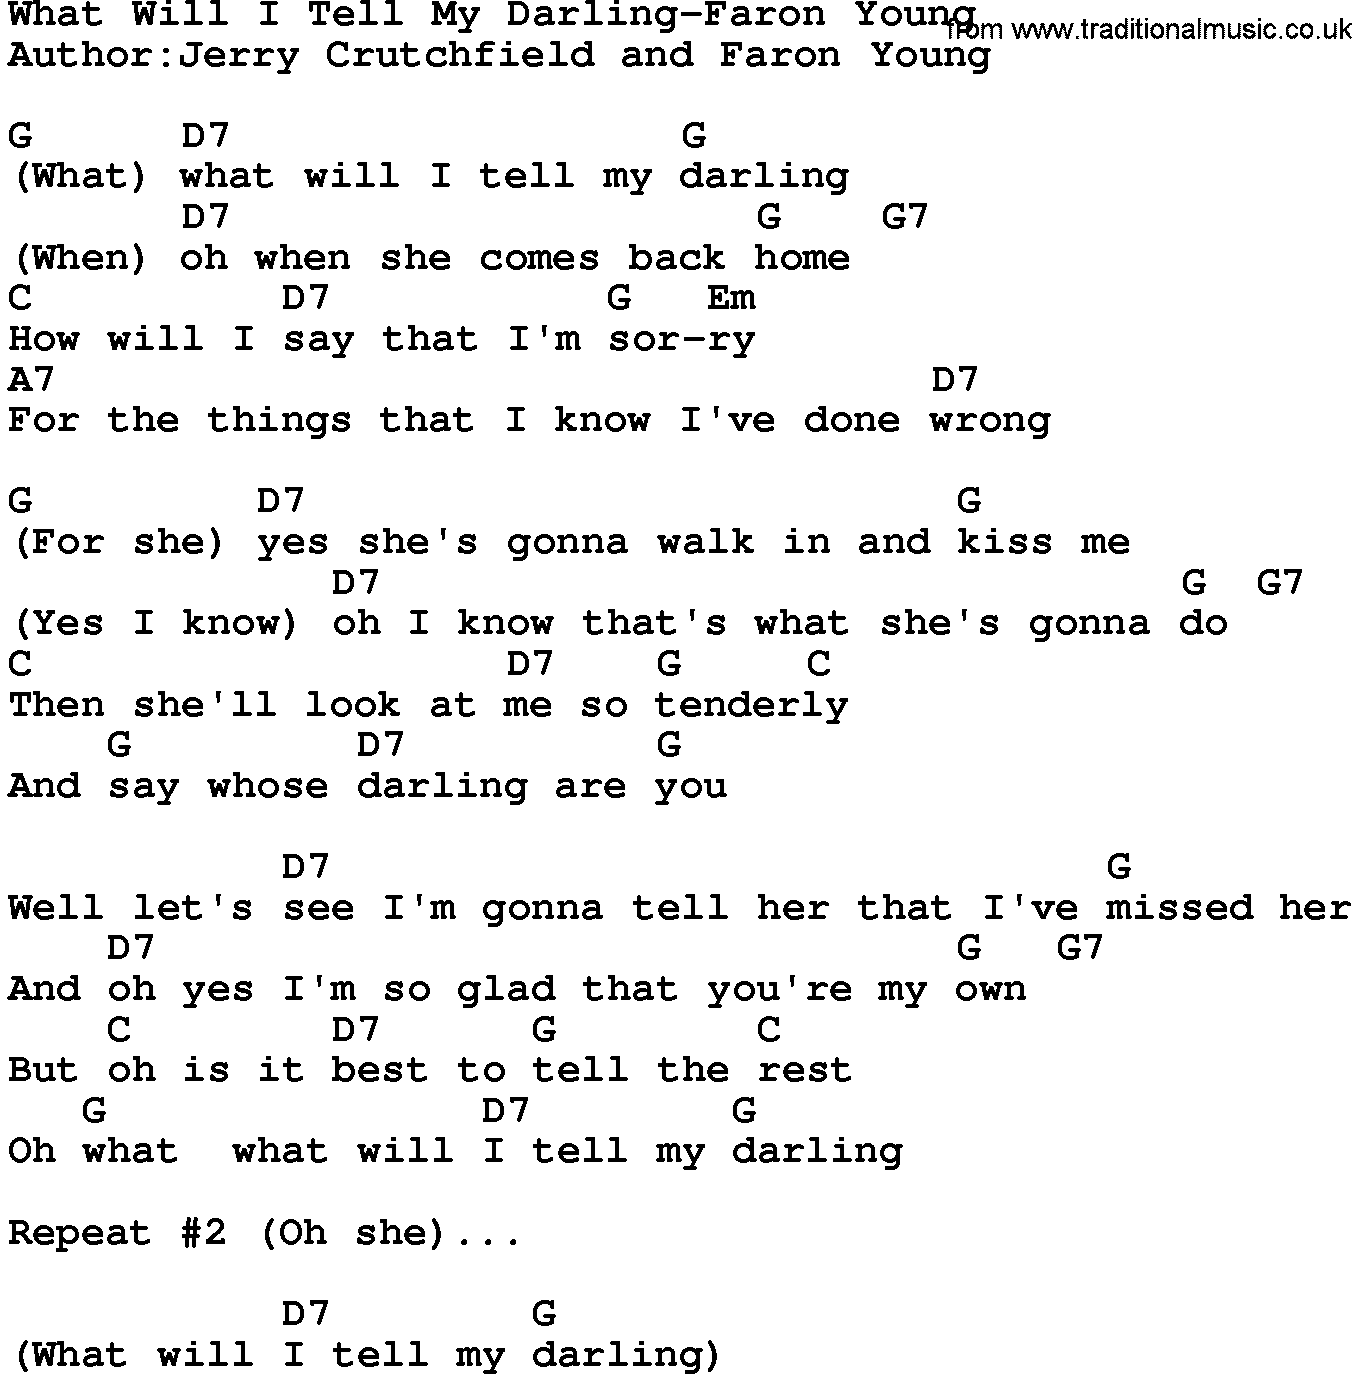 Country music song: What Will I Tell My Darling-Faron Young lyrics and chords